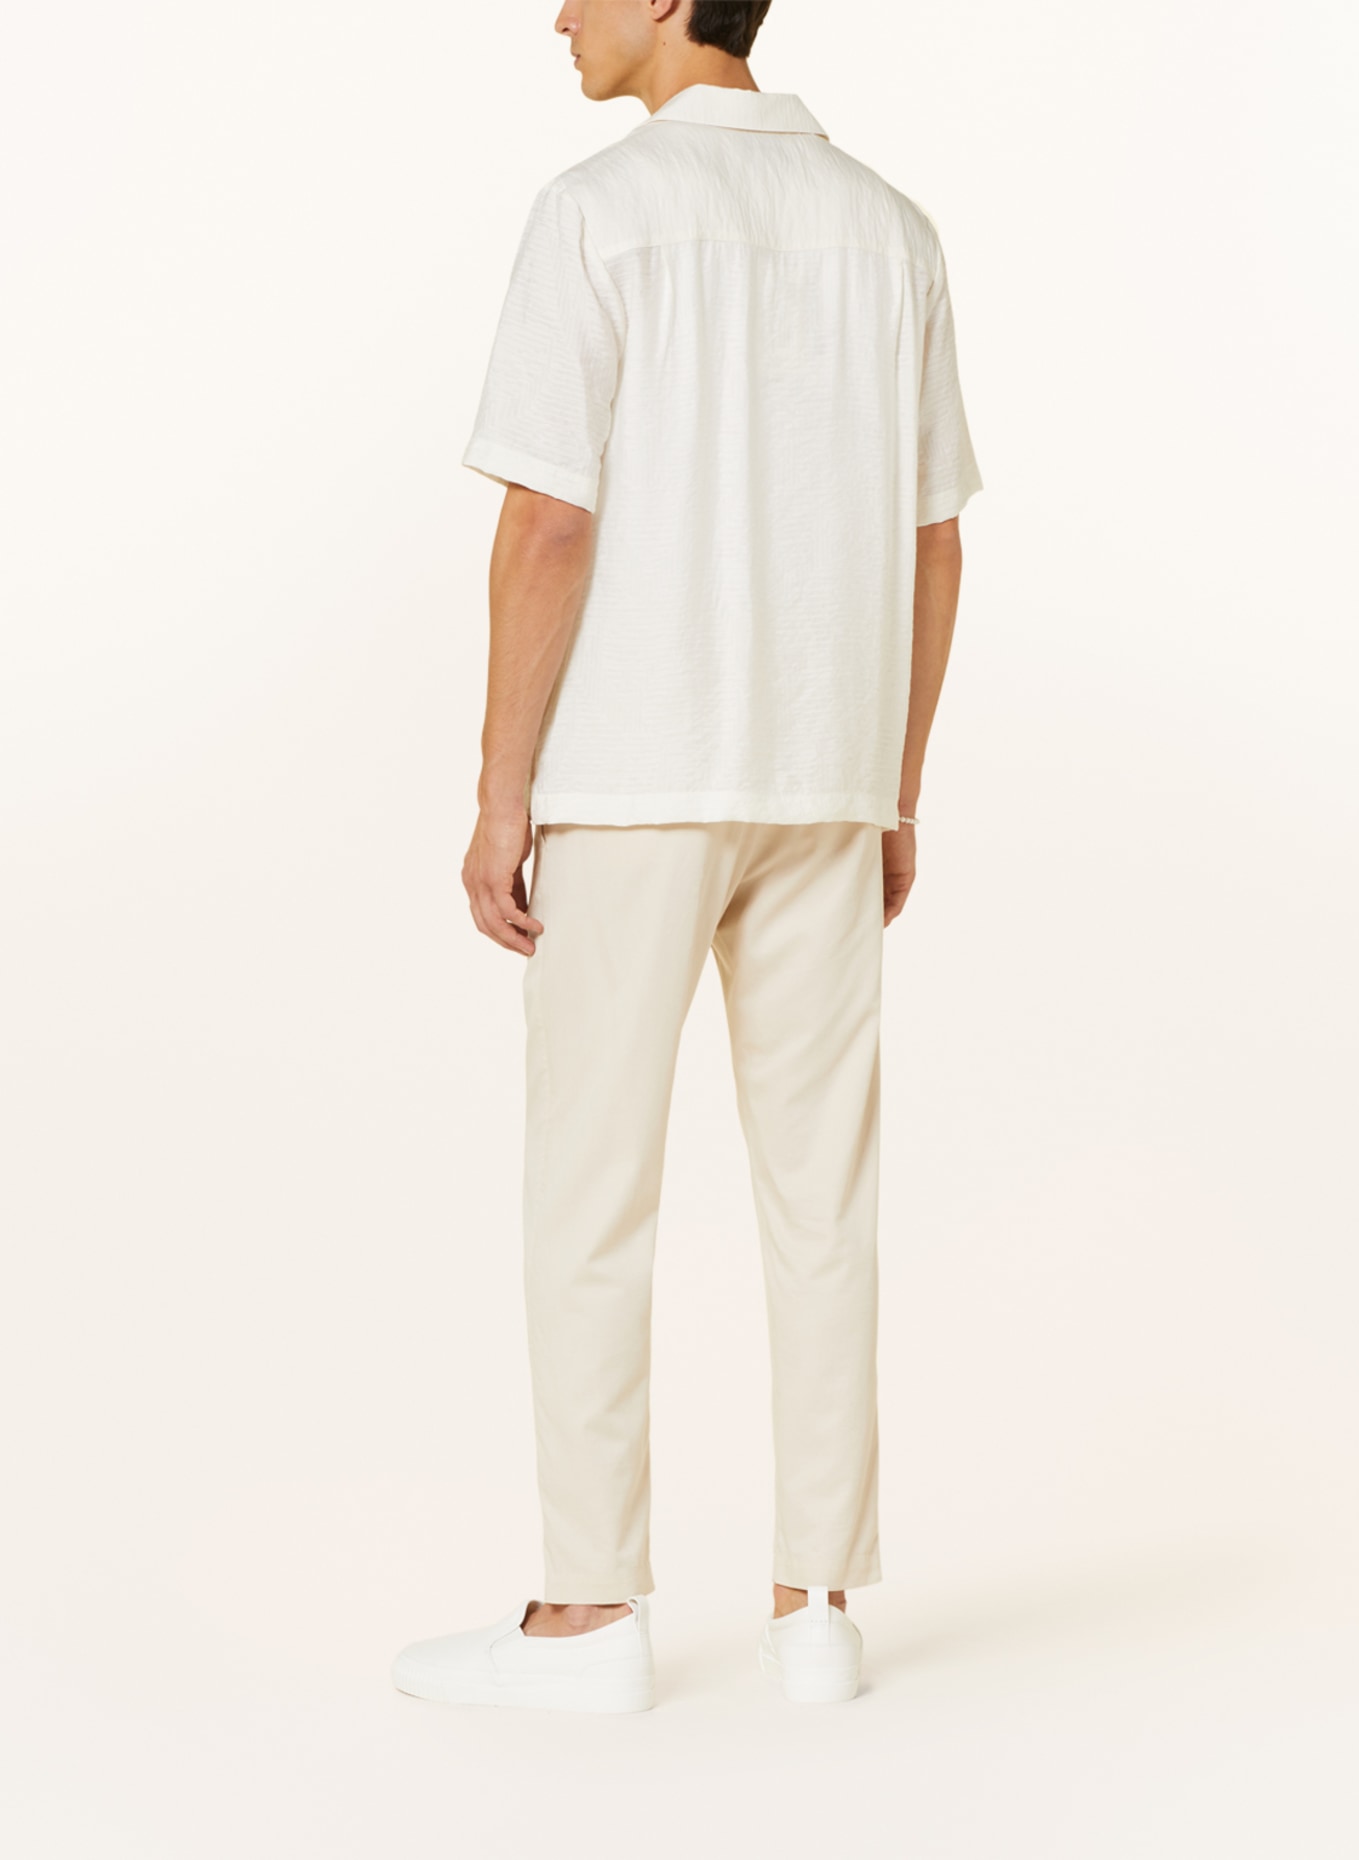 COS Resort shirt relaxed fit, Color: ECRU (Image 3)